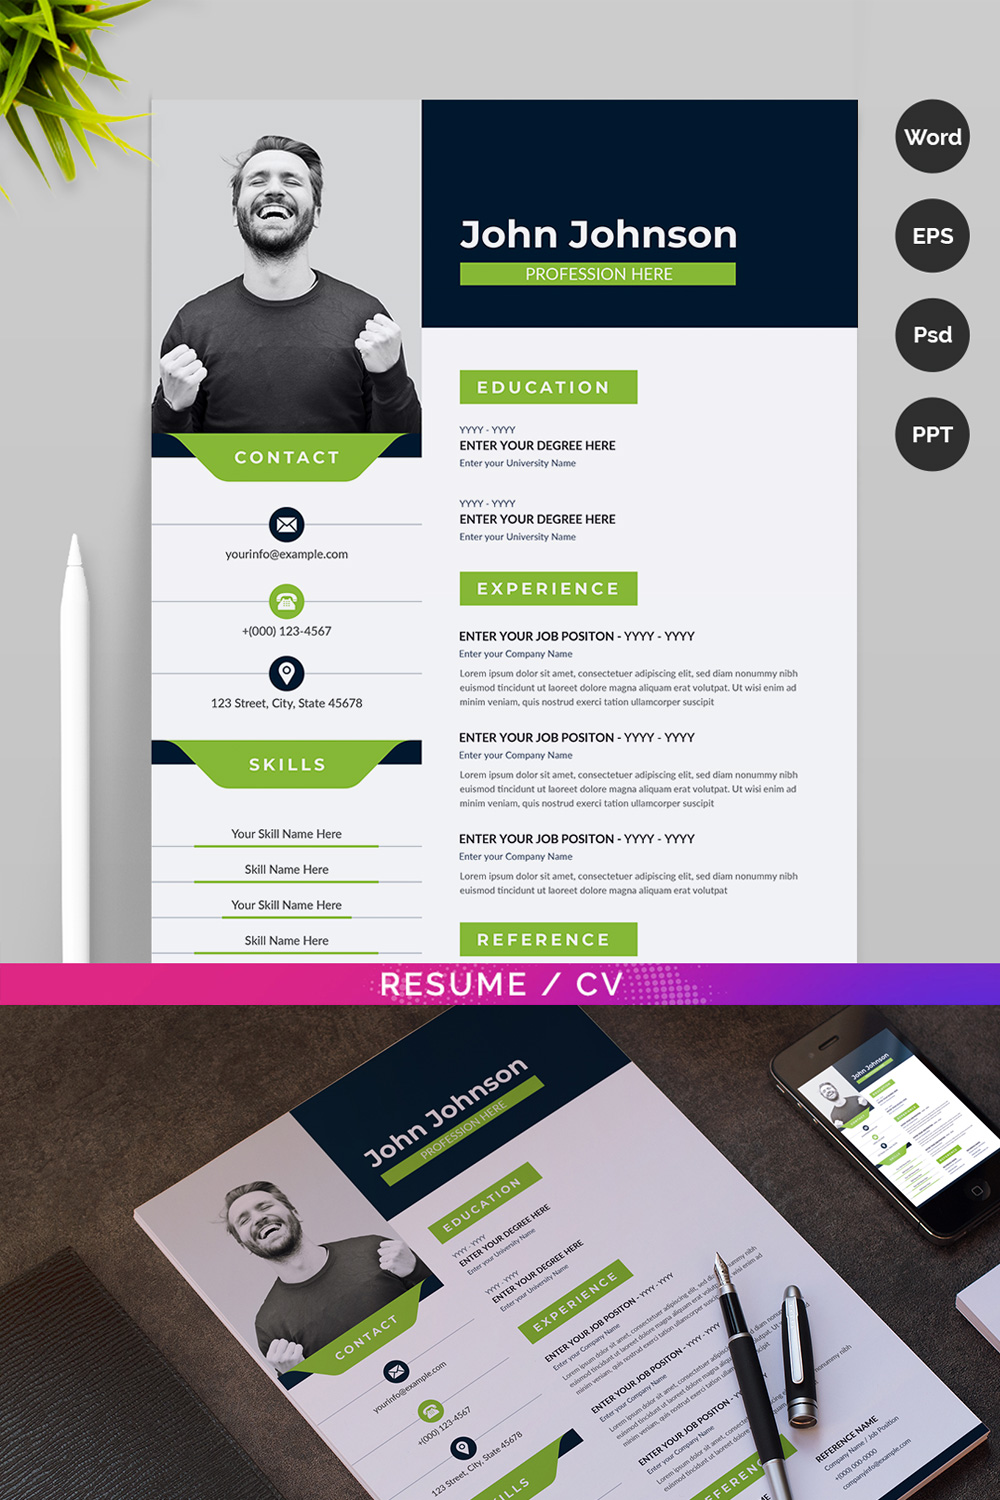 Clean and modern resume template with green accents.